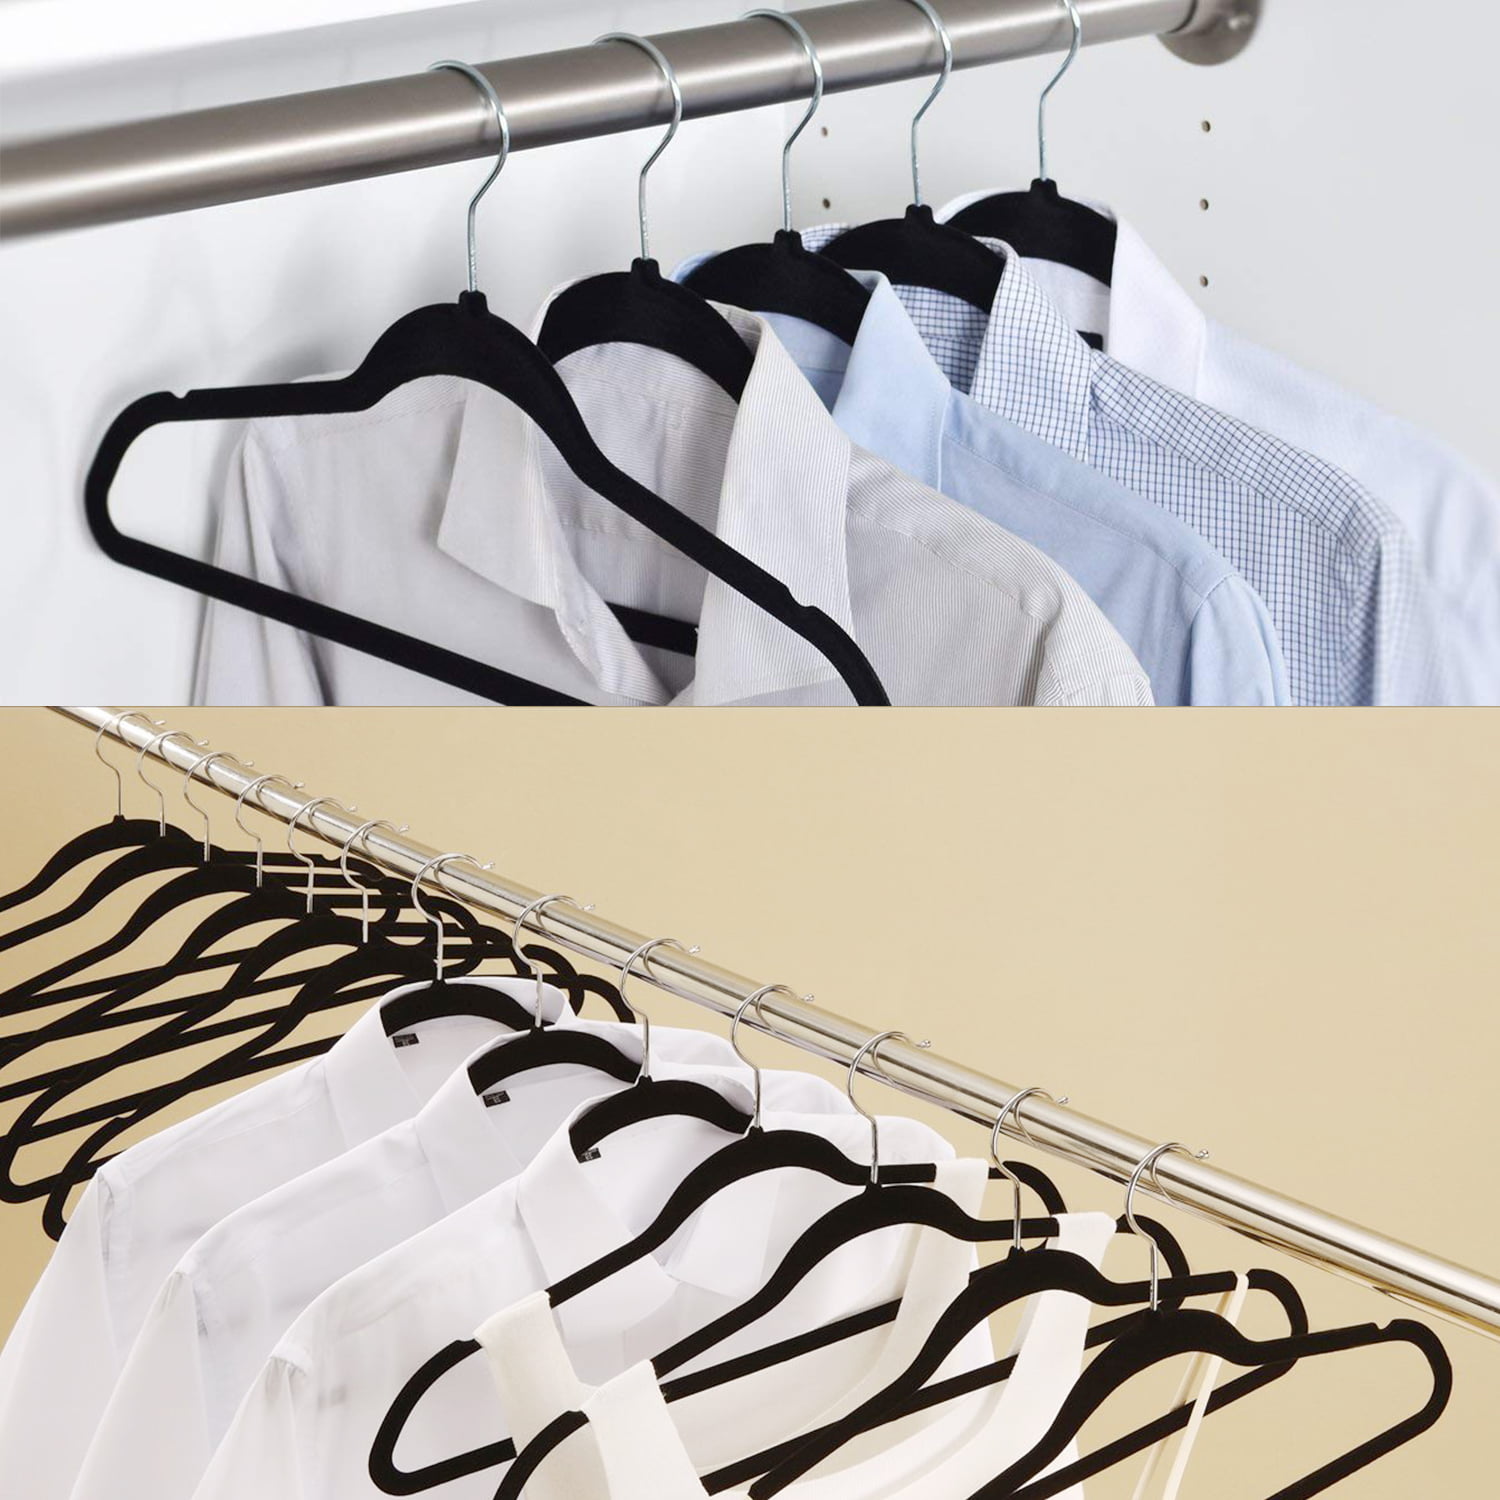 VECELO 25 Pack Clothes Hangers, Non-Slip Plastic Coat Hanger, 360°Swivel Hook & Space Saving for Bedroom Closet, Great for Shirts, Pants, Excellent